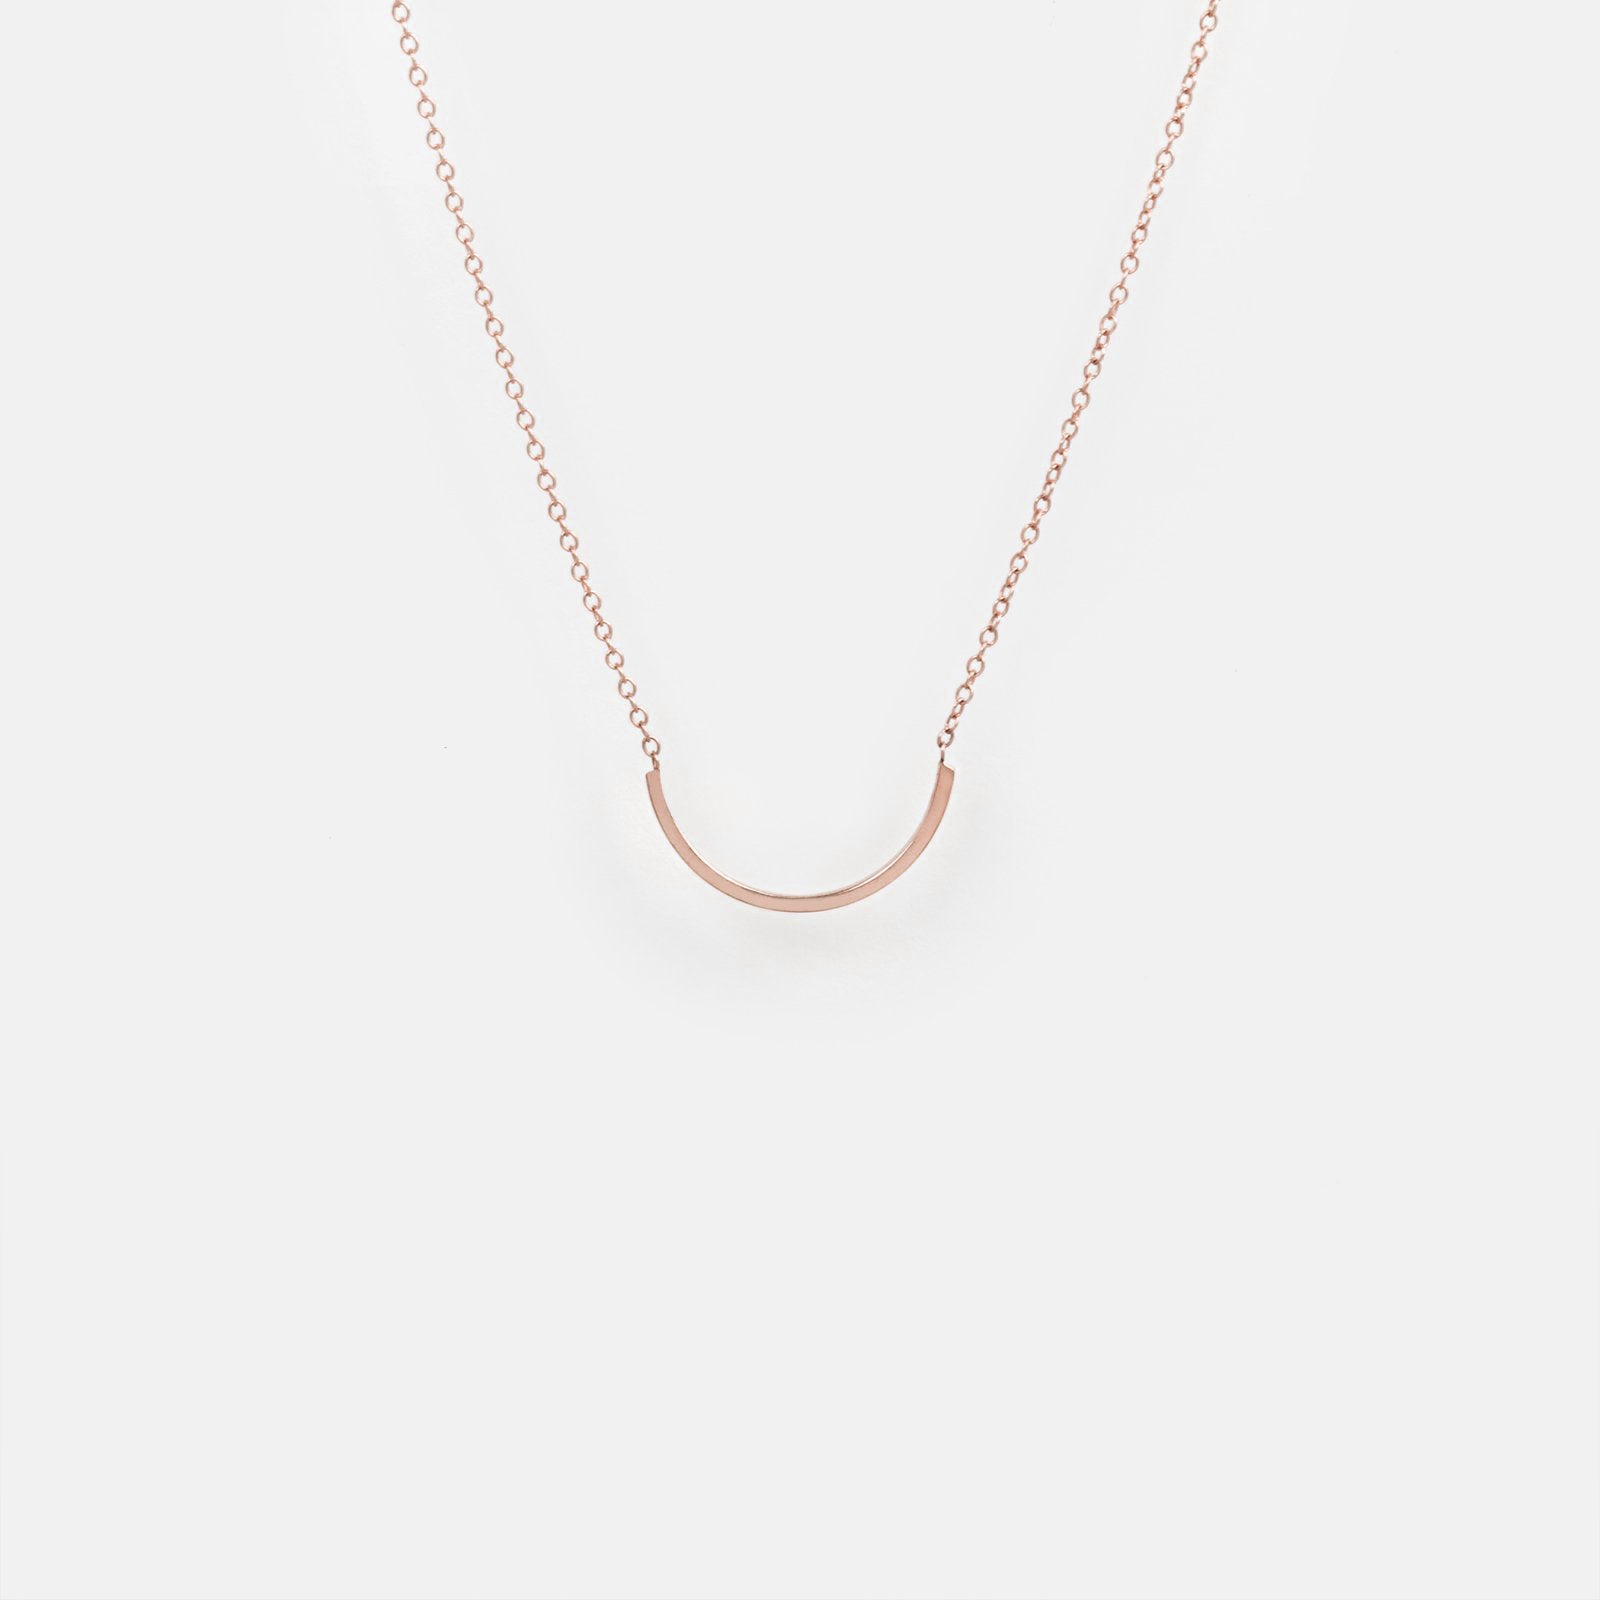 Uva Cool Necklace in 14k Rose Gold By SHW Fine Jewelry New York City